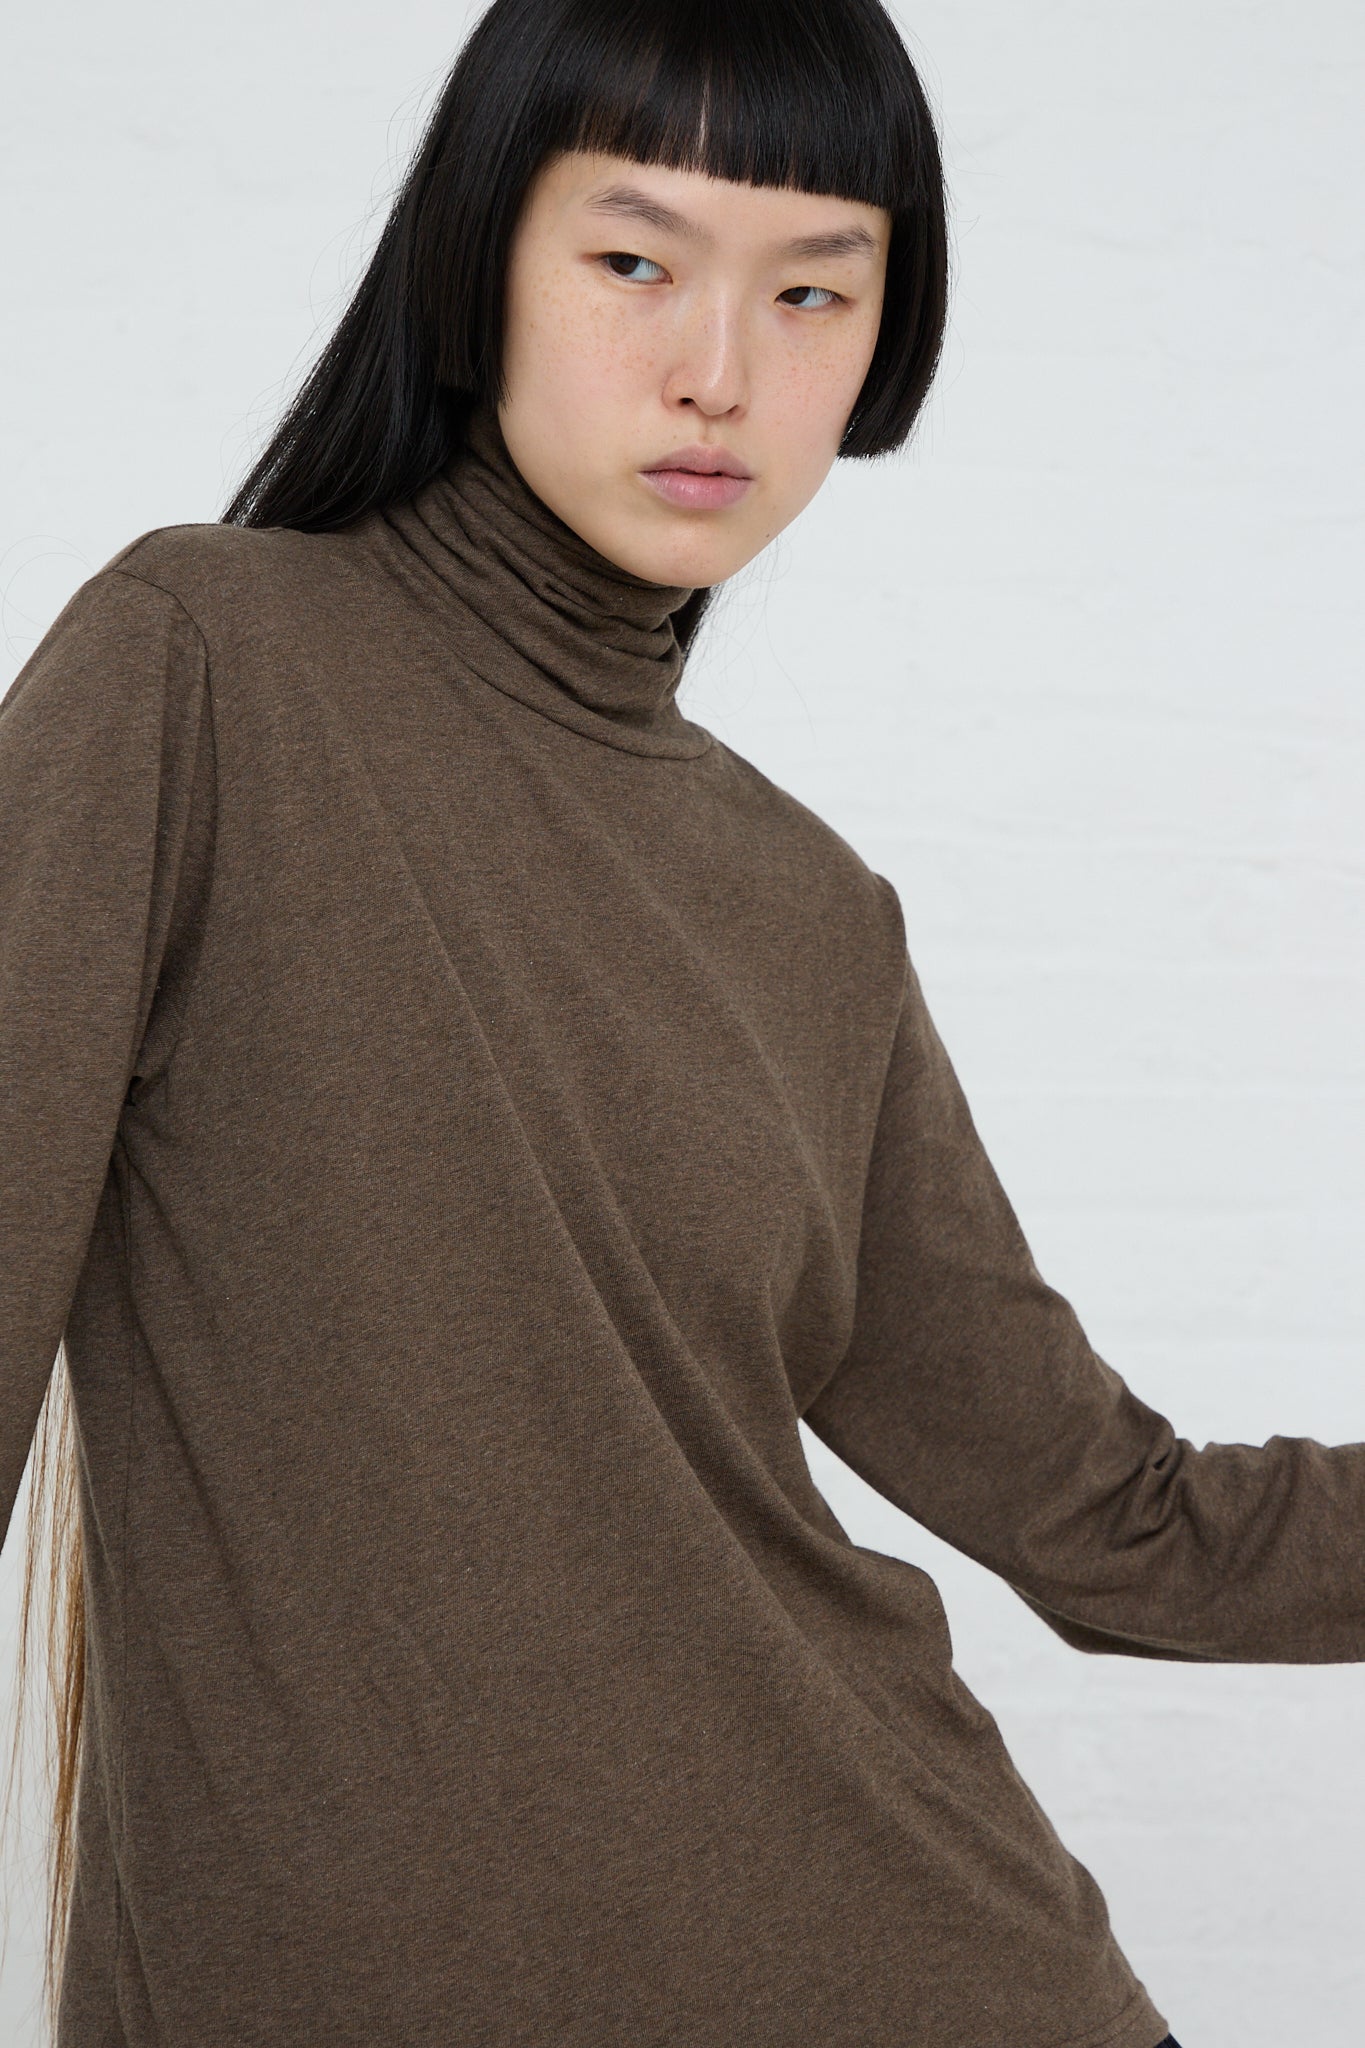 The model is wearing a relaxed fit brown Ichi cotton knit turtleneck in Mocha.